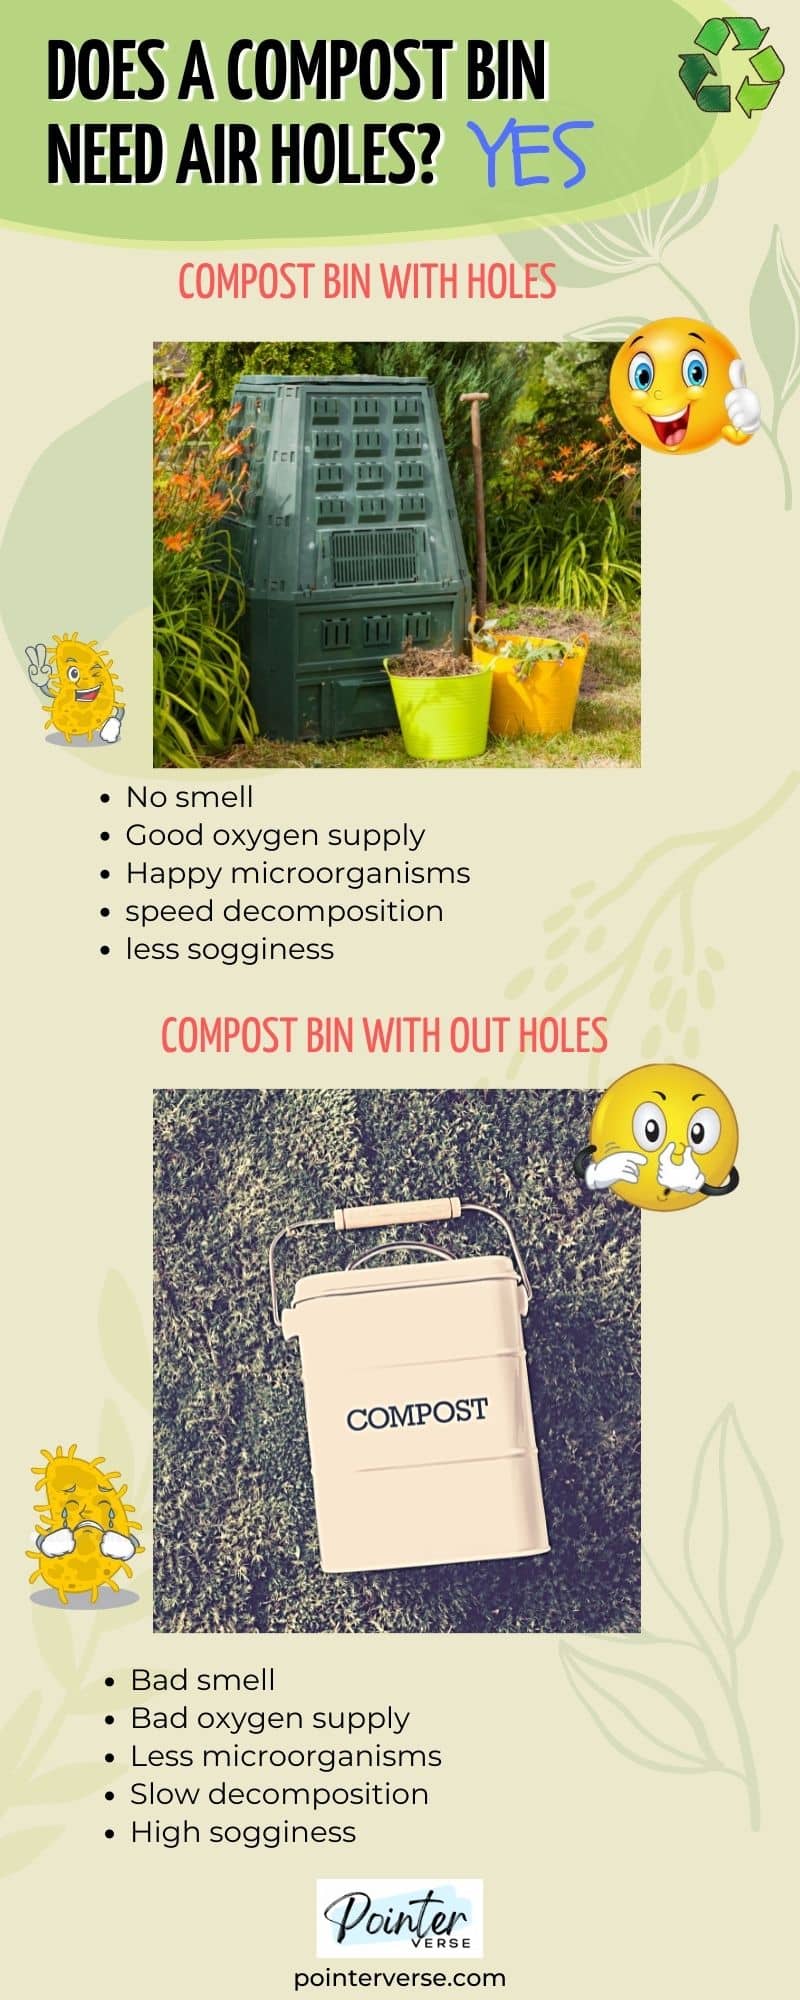 Does a compost bin need air holes Infographic